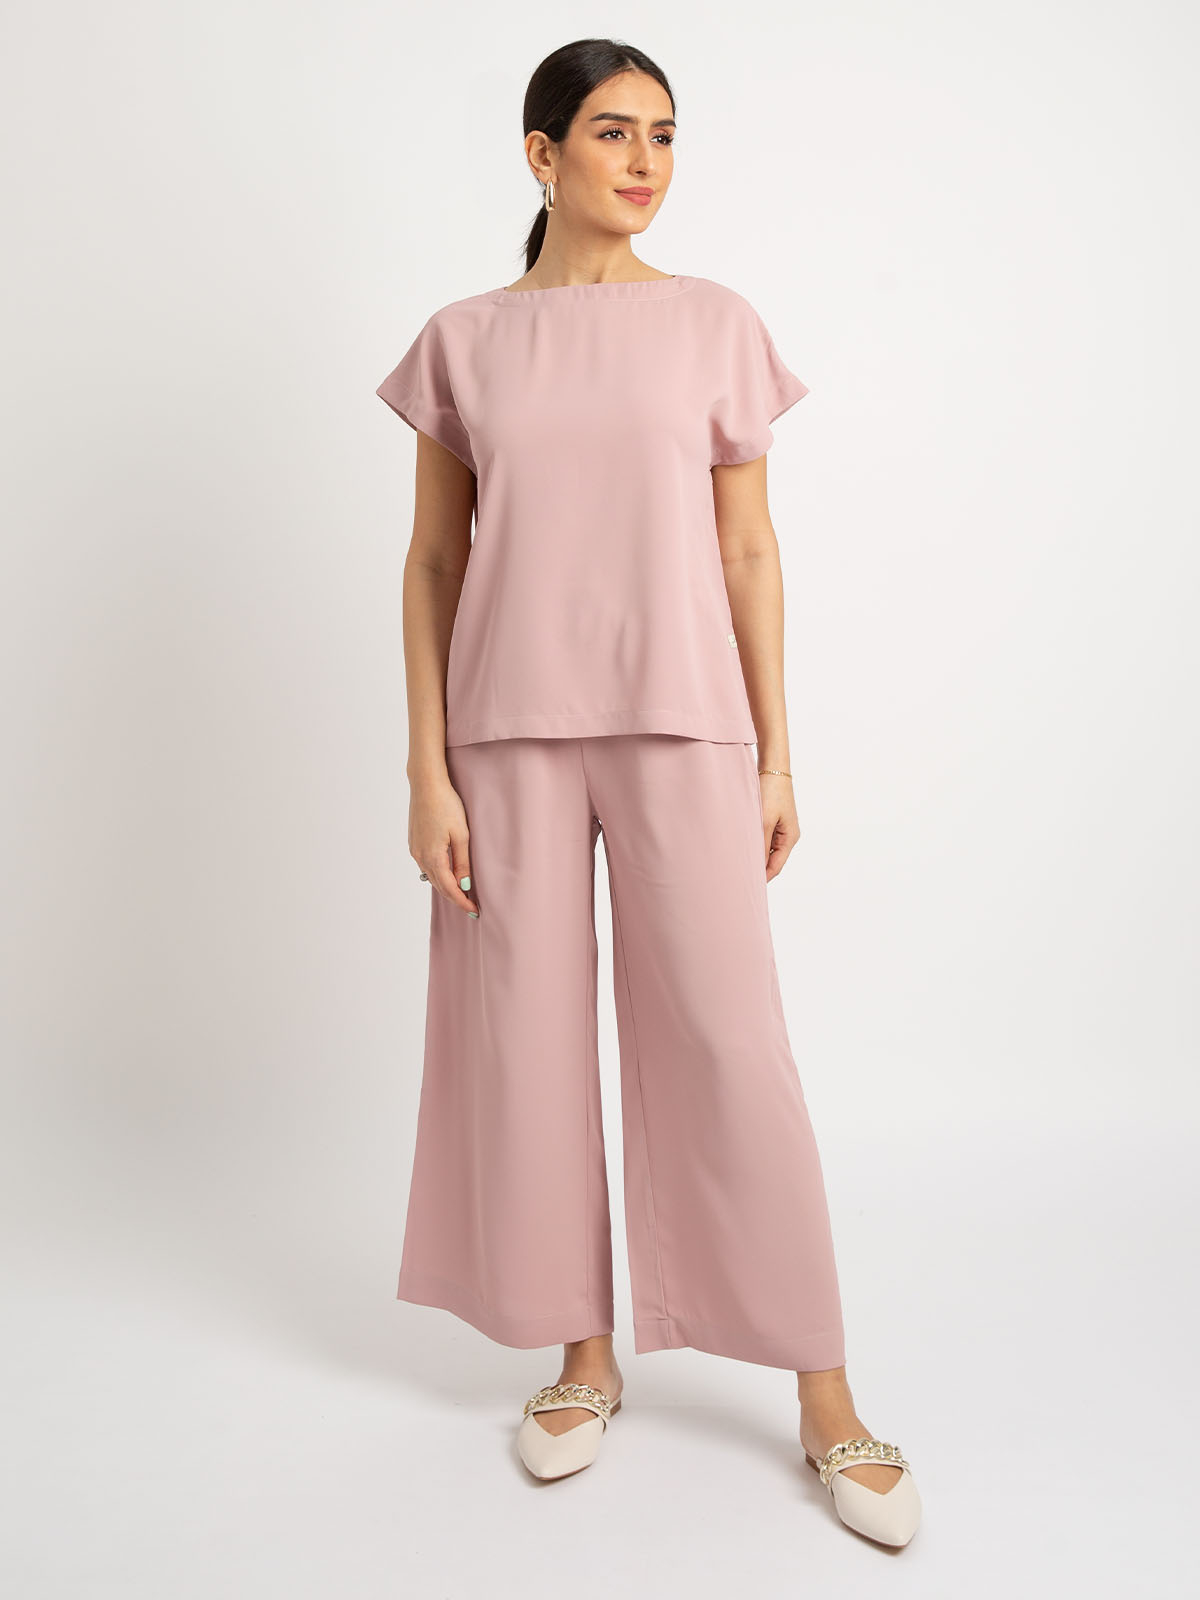 Kaafmeem women clothing rose trouser and top under the abaya matching set in soft fabric coords for everyday wear